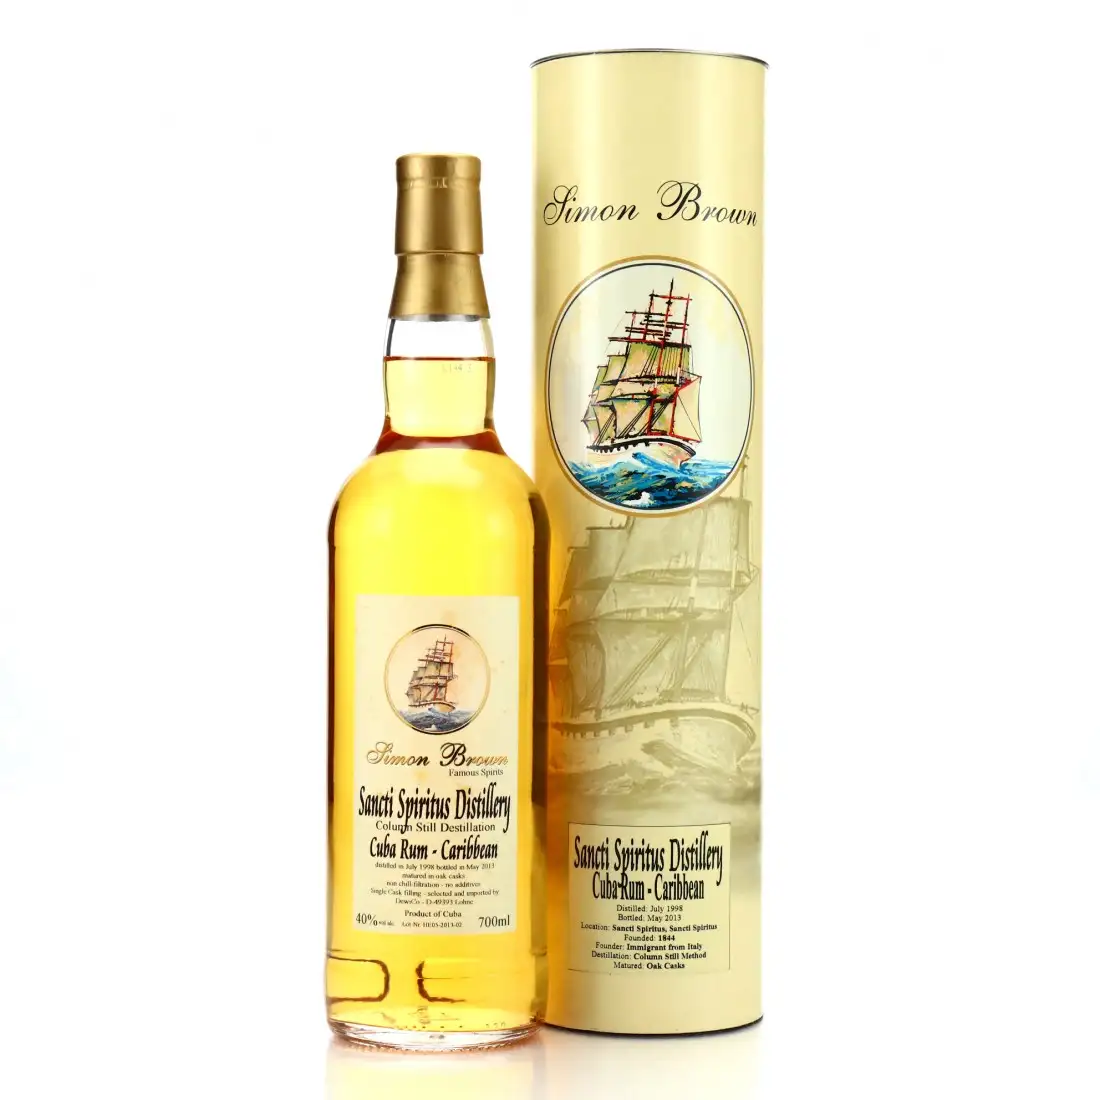 Image of the front of the bottle of the rum Cuba Rum - Caribbean